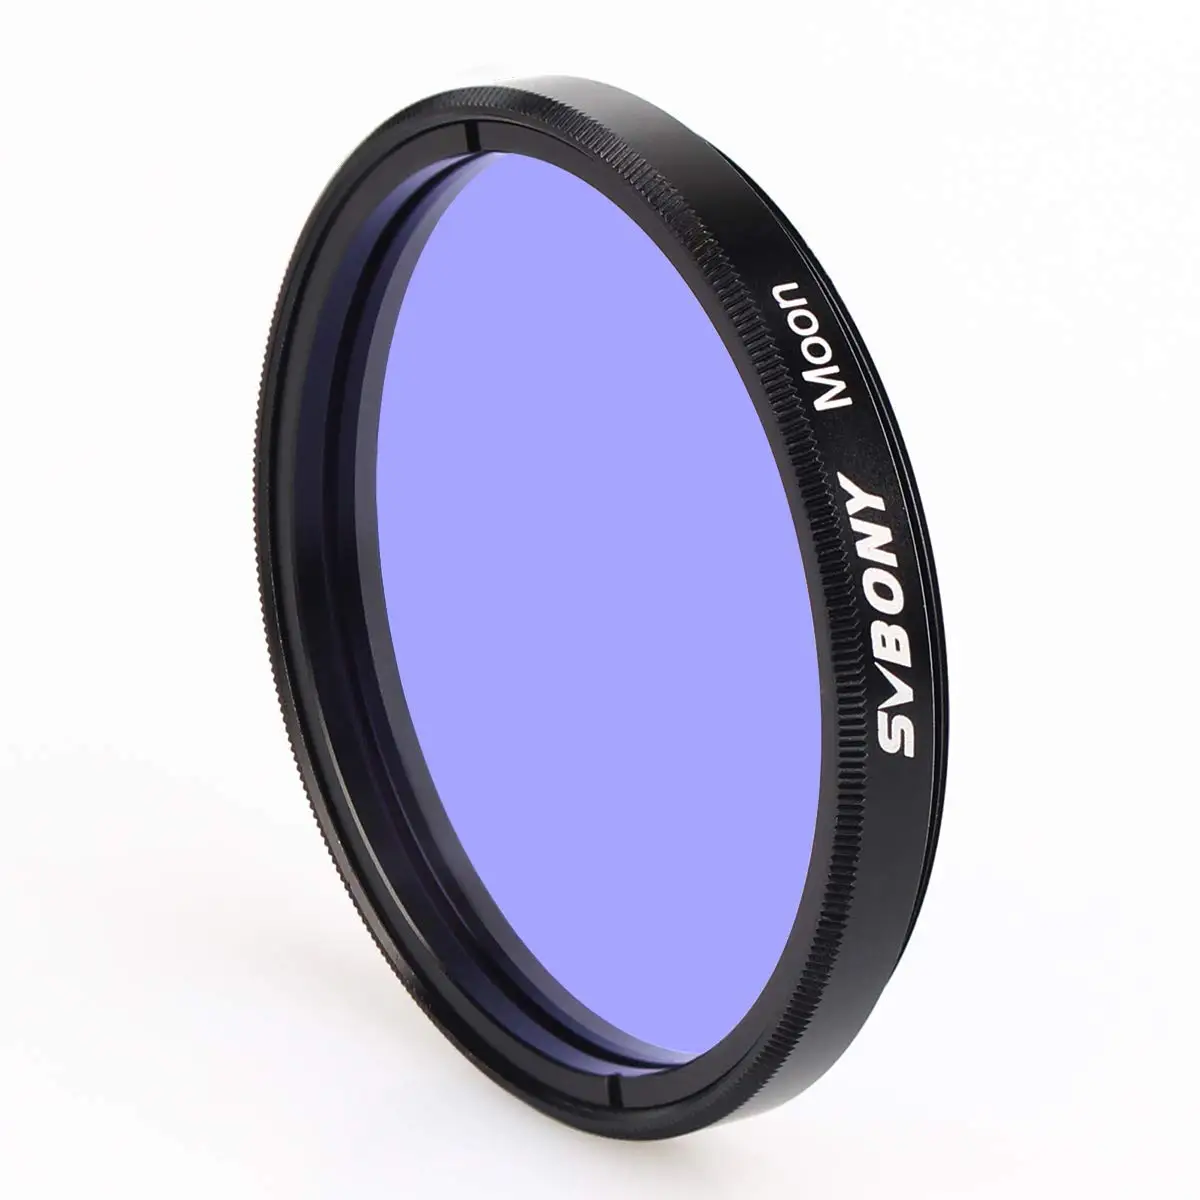 

SVBONY Telescope Filter Moon Filter Telescope Filter for Standard 2 inches FIilter Thread with Metal Frame Optical Glass